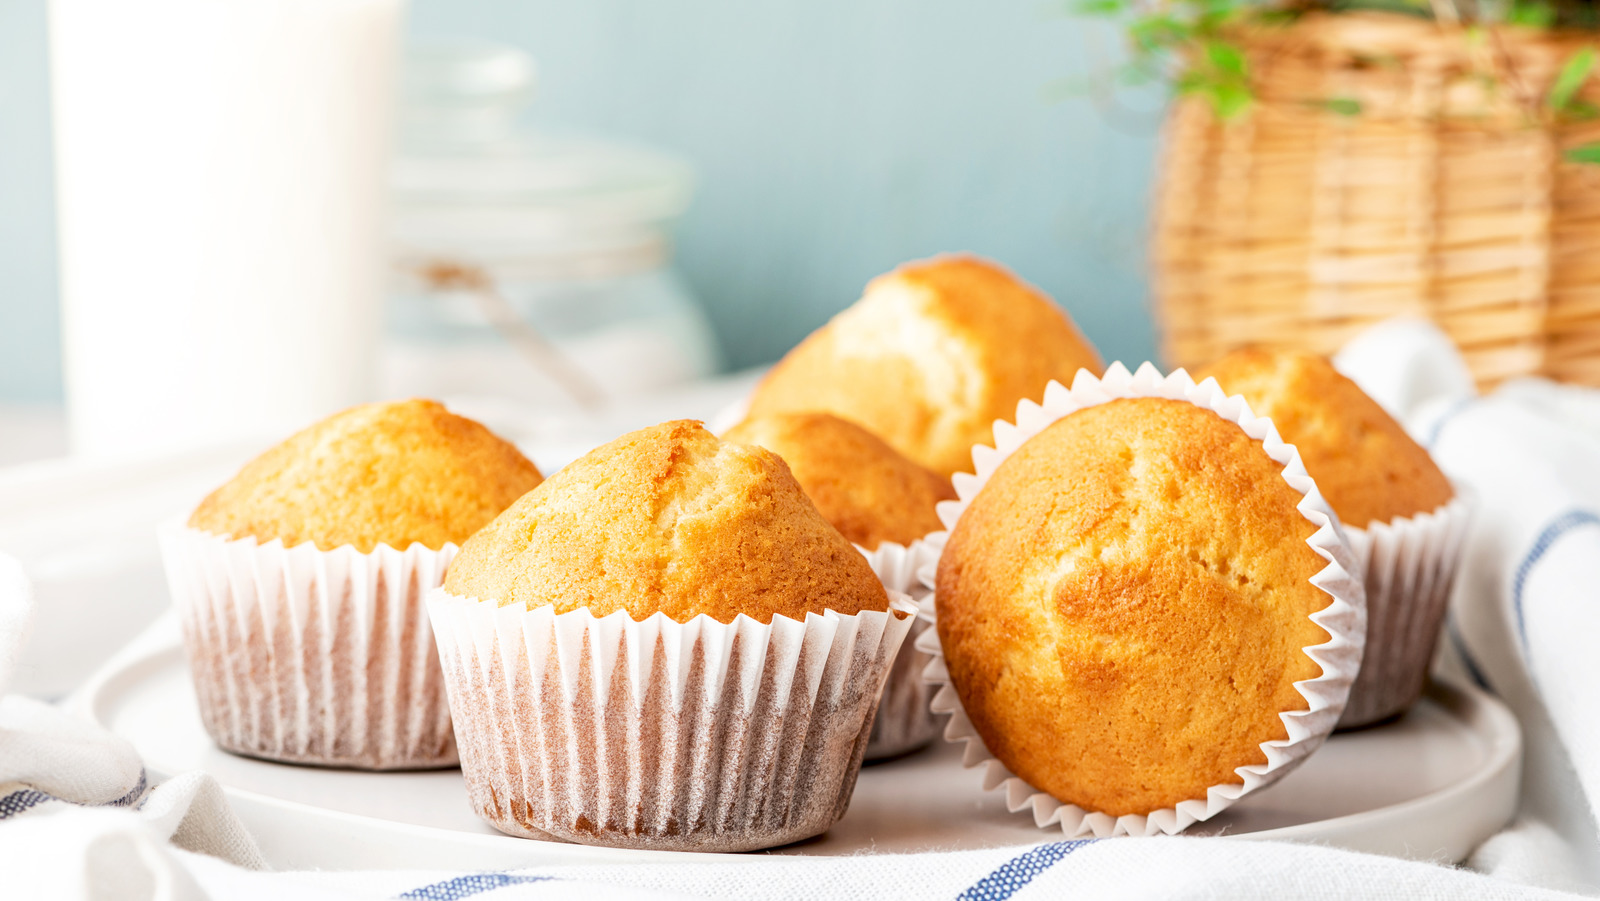 https://www.mashed.com/img/gallery/youve-been-storing-muffins-wrong-this-whole-time/l-intro-1605316209.jpg